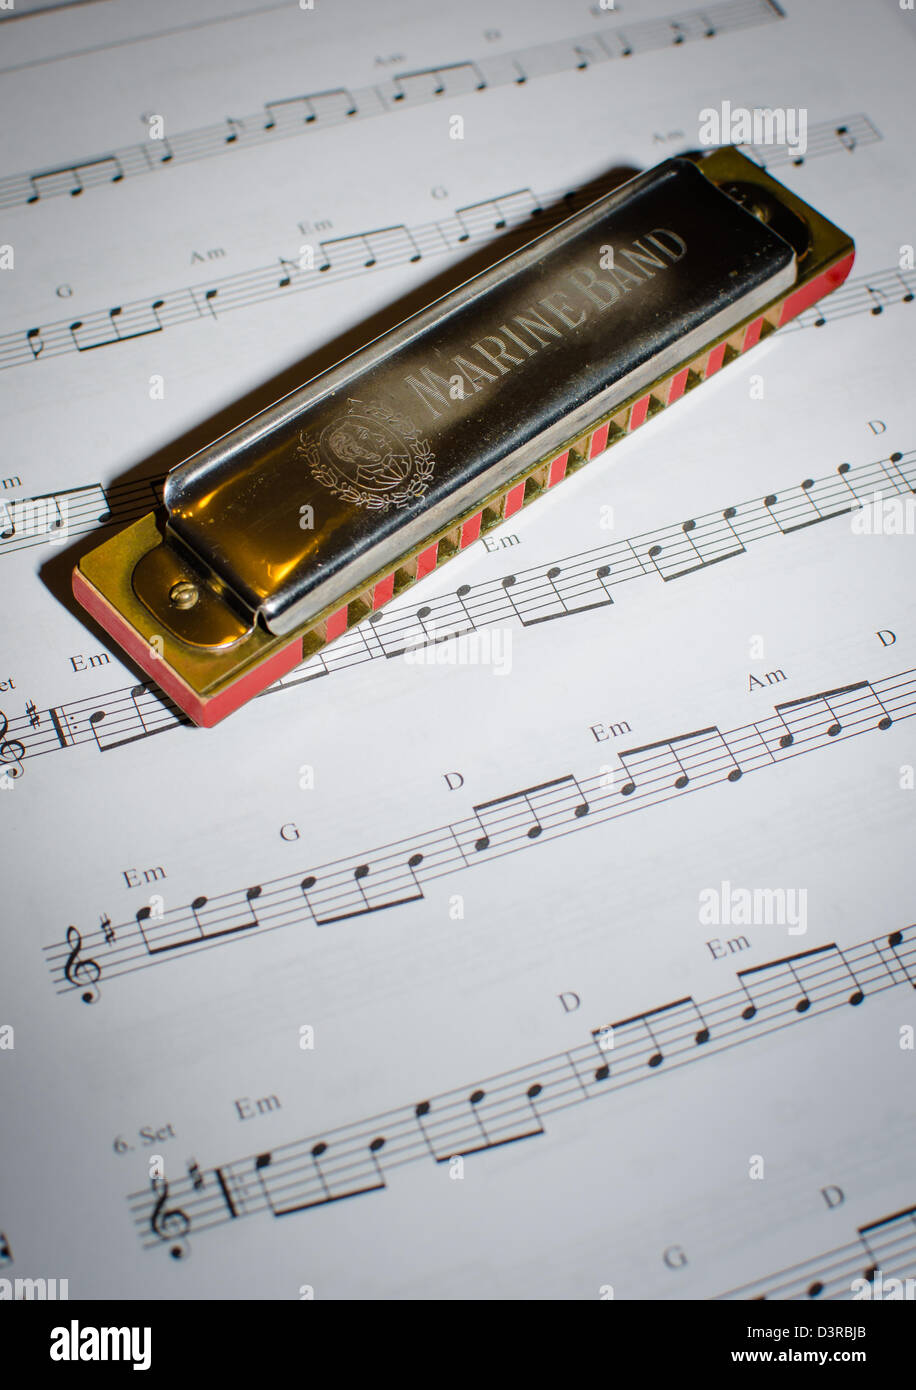 Old Harmonica And Note Sheet Stock Photo